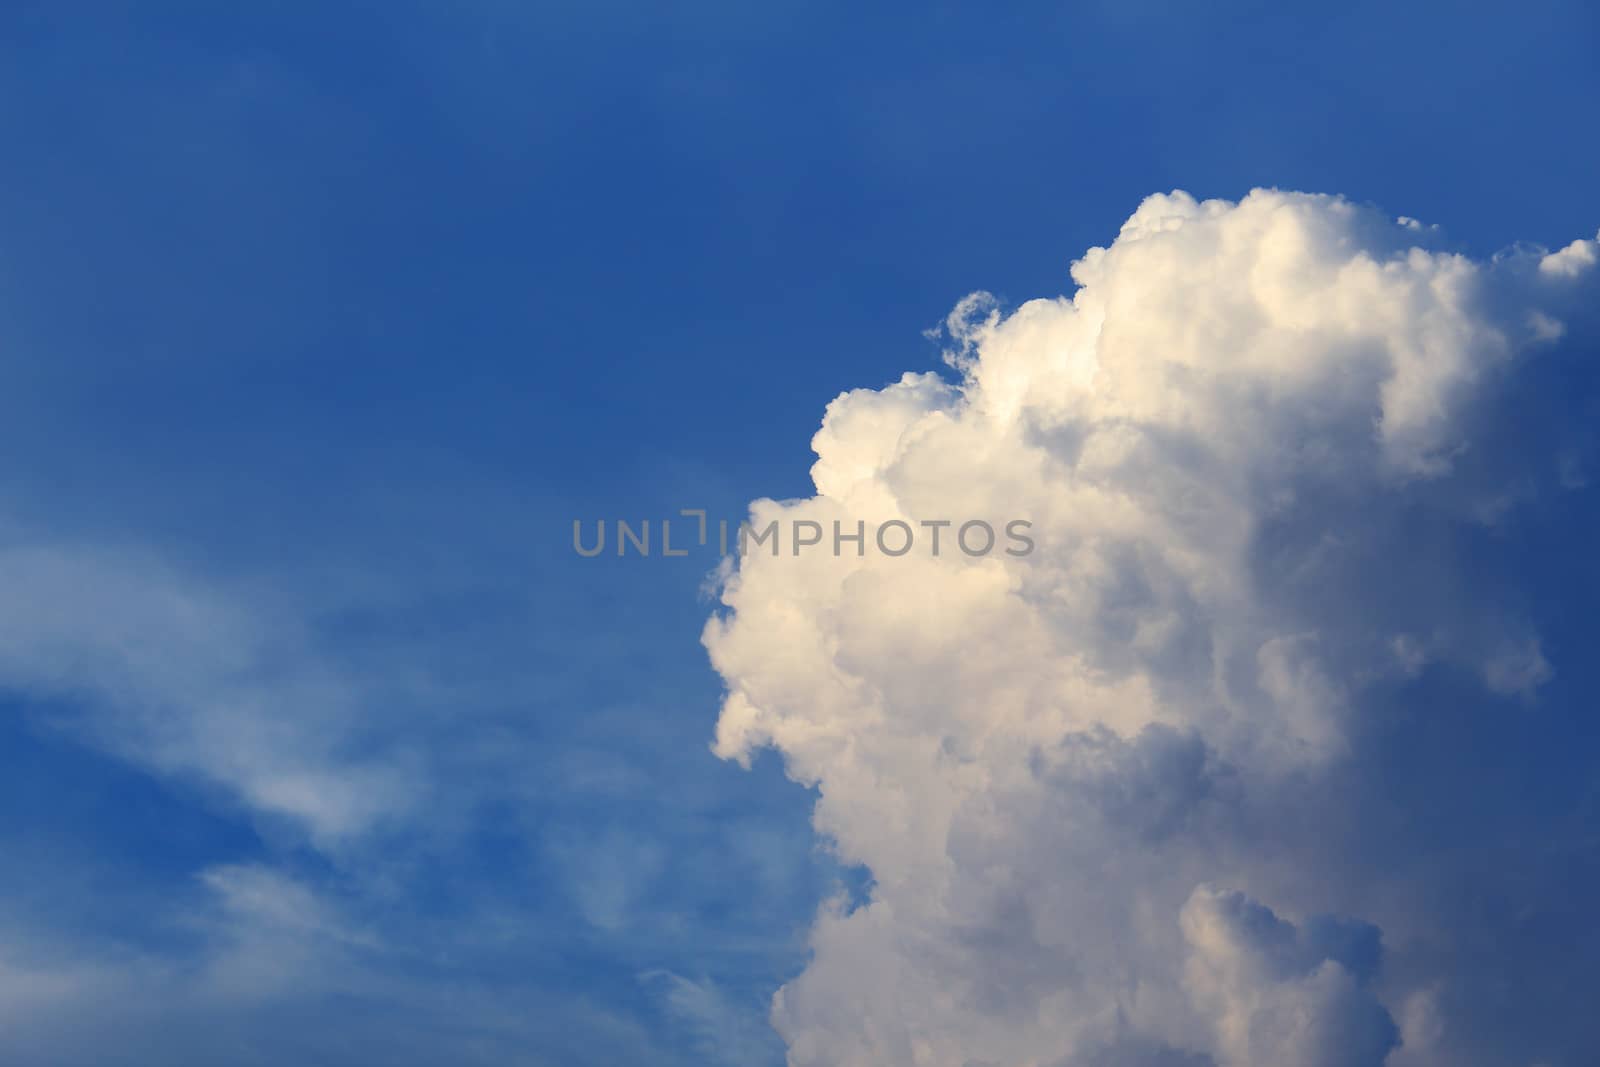 Blue sky with cloud by foto76